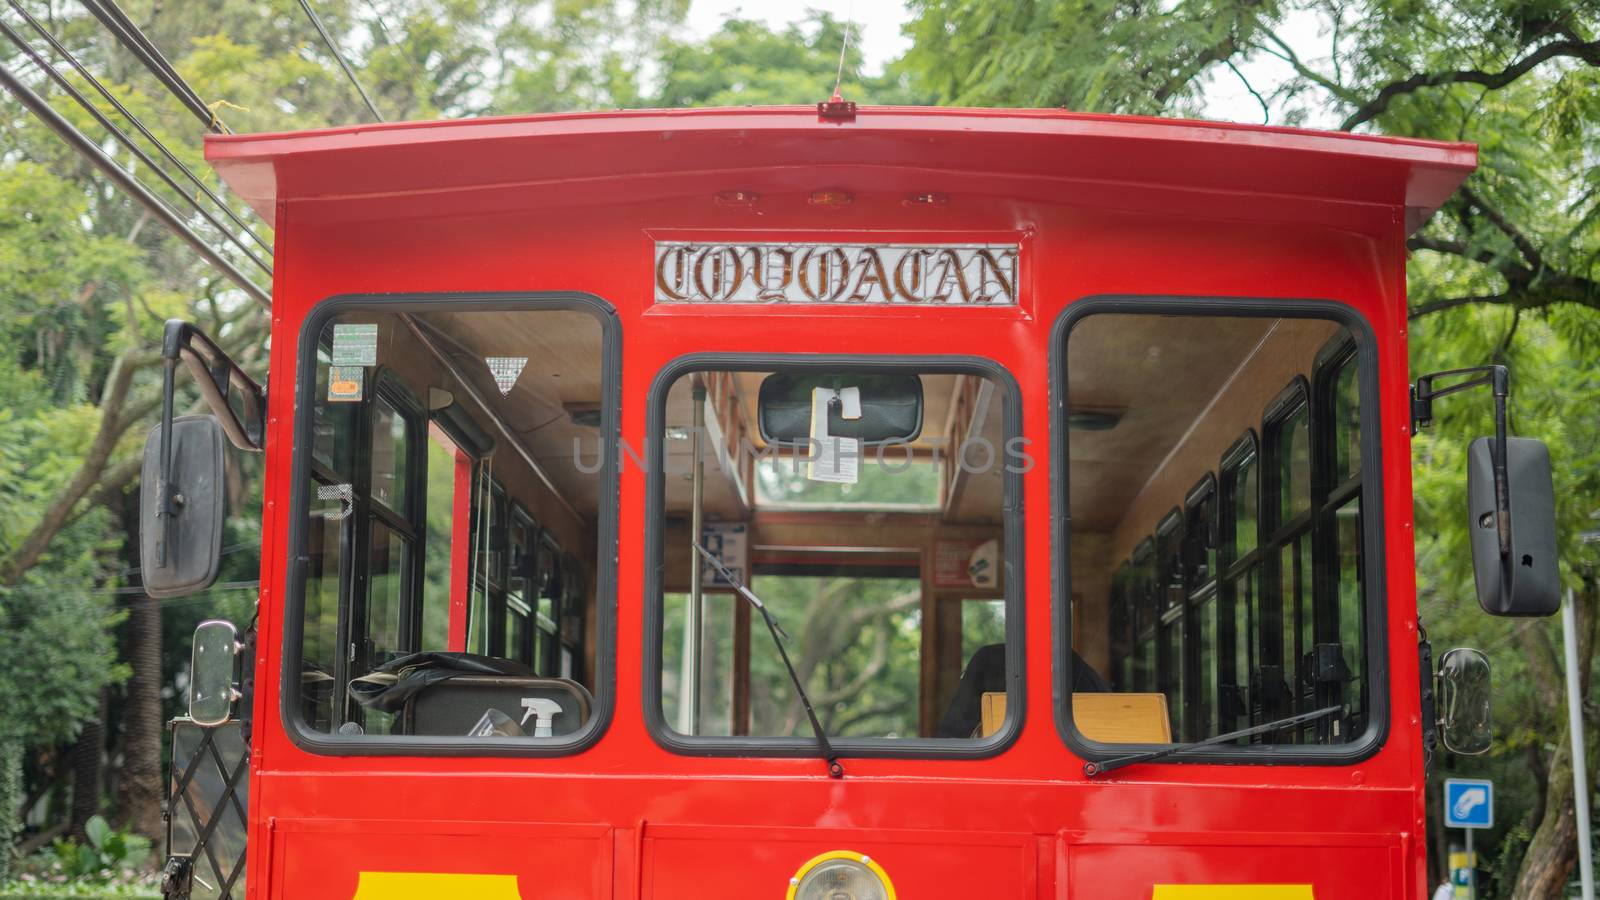 Picture of the front side of a red and yellow trolley car driving on a street surrounded by trees